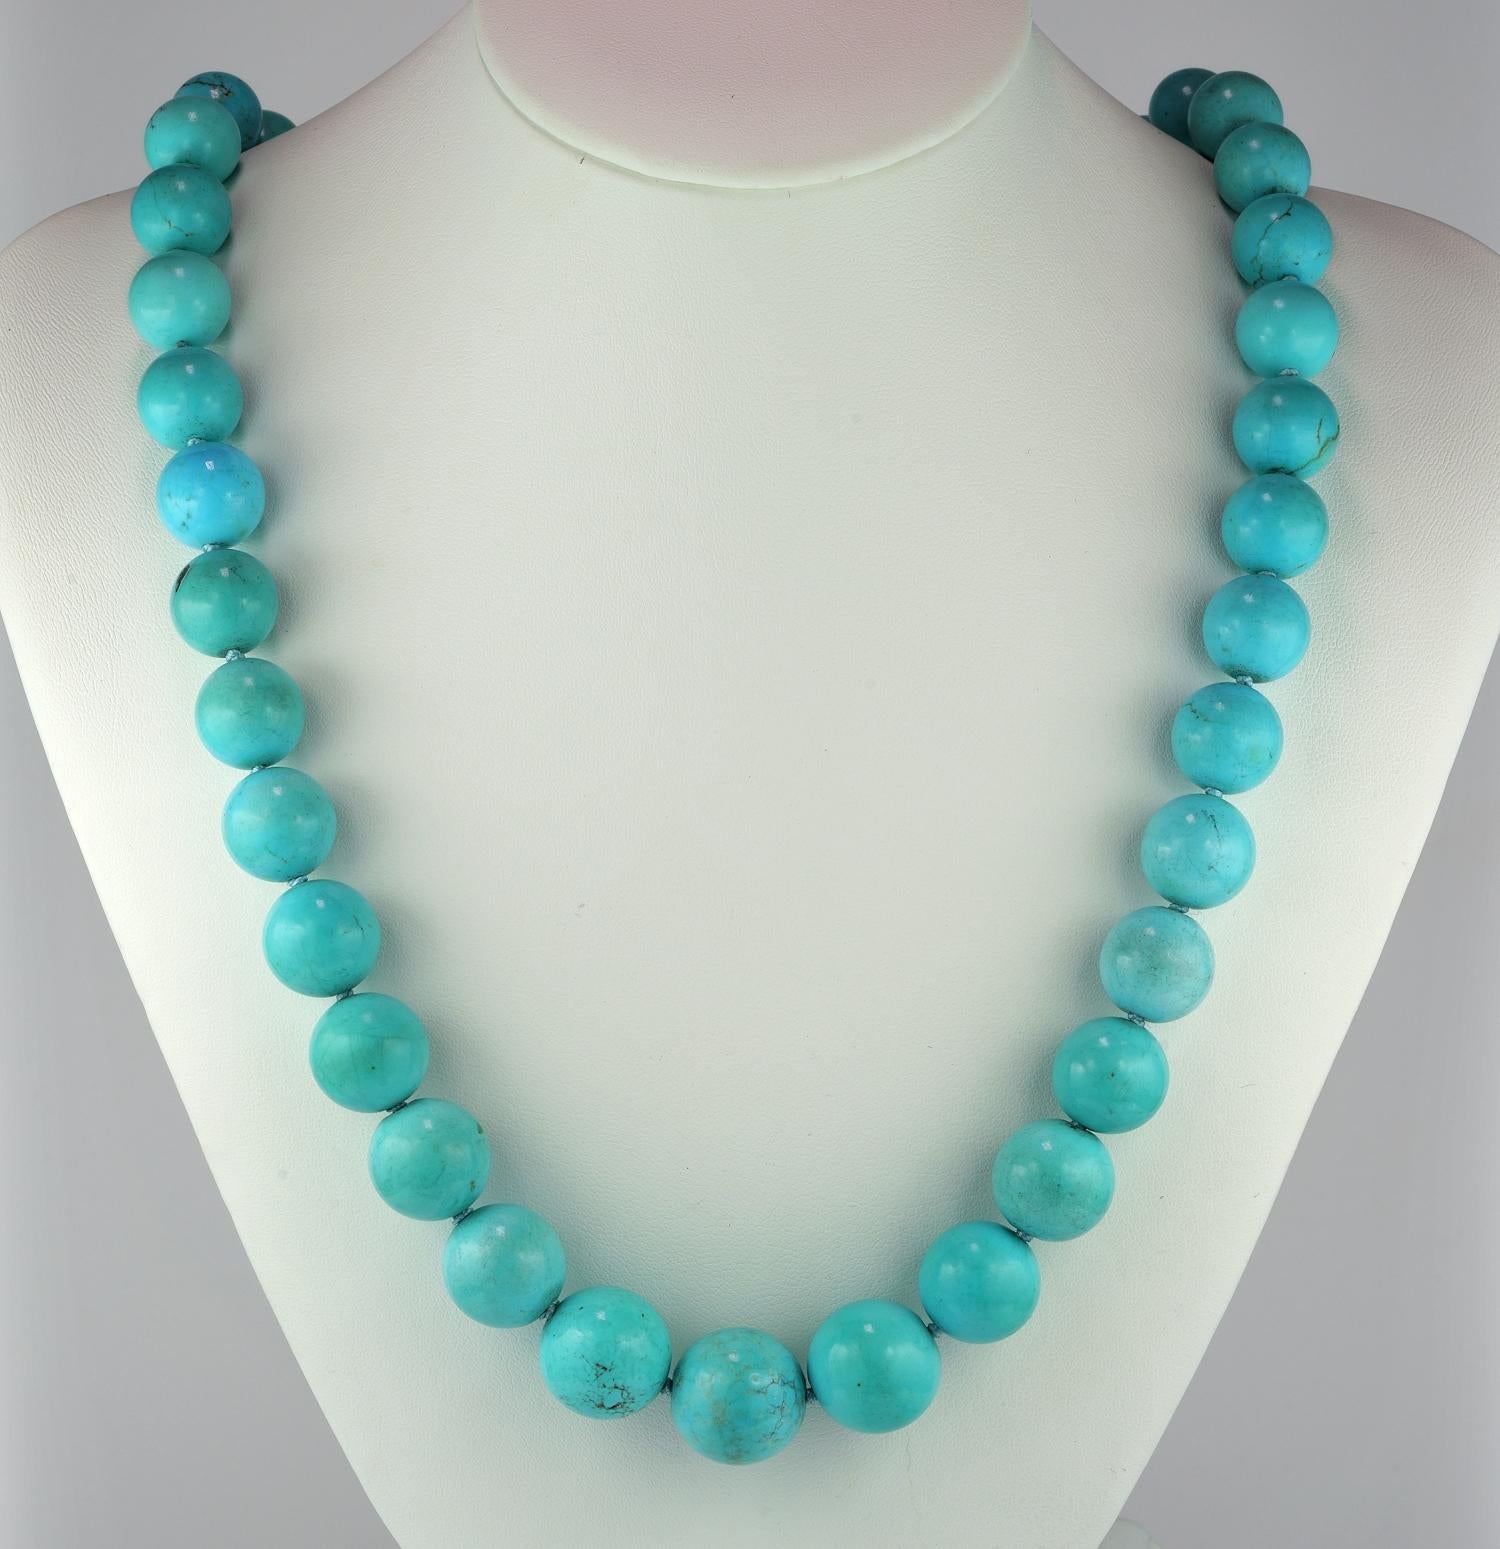 This outstanding mi-century Turquoise necklace is totally untreated, 1950 ca.
Majority of Turquoise necklaces are in fact treated, stabilized , tinted, waxed, reconstituted, vaporized quarts enhanced to end with paste which is the poorer
This scarce